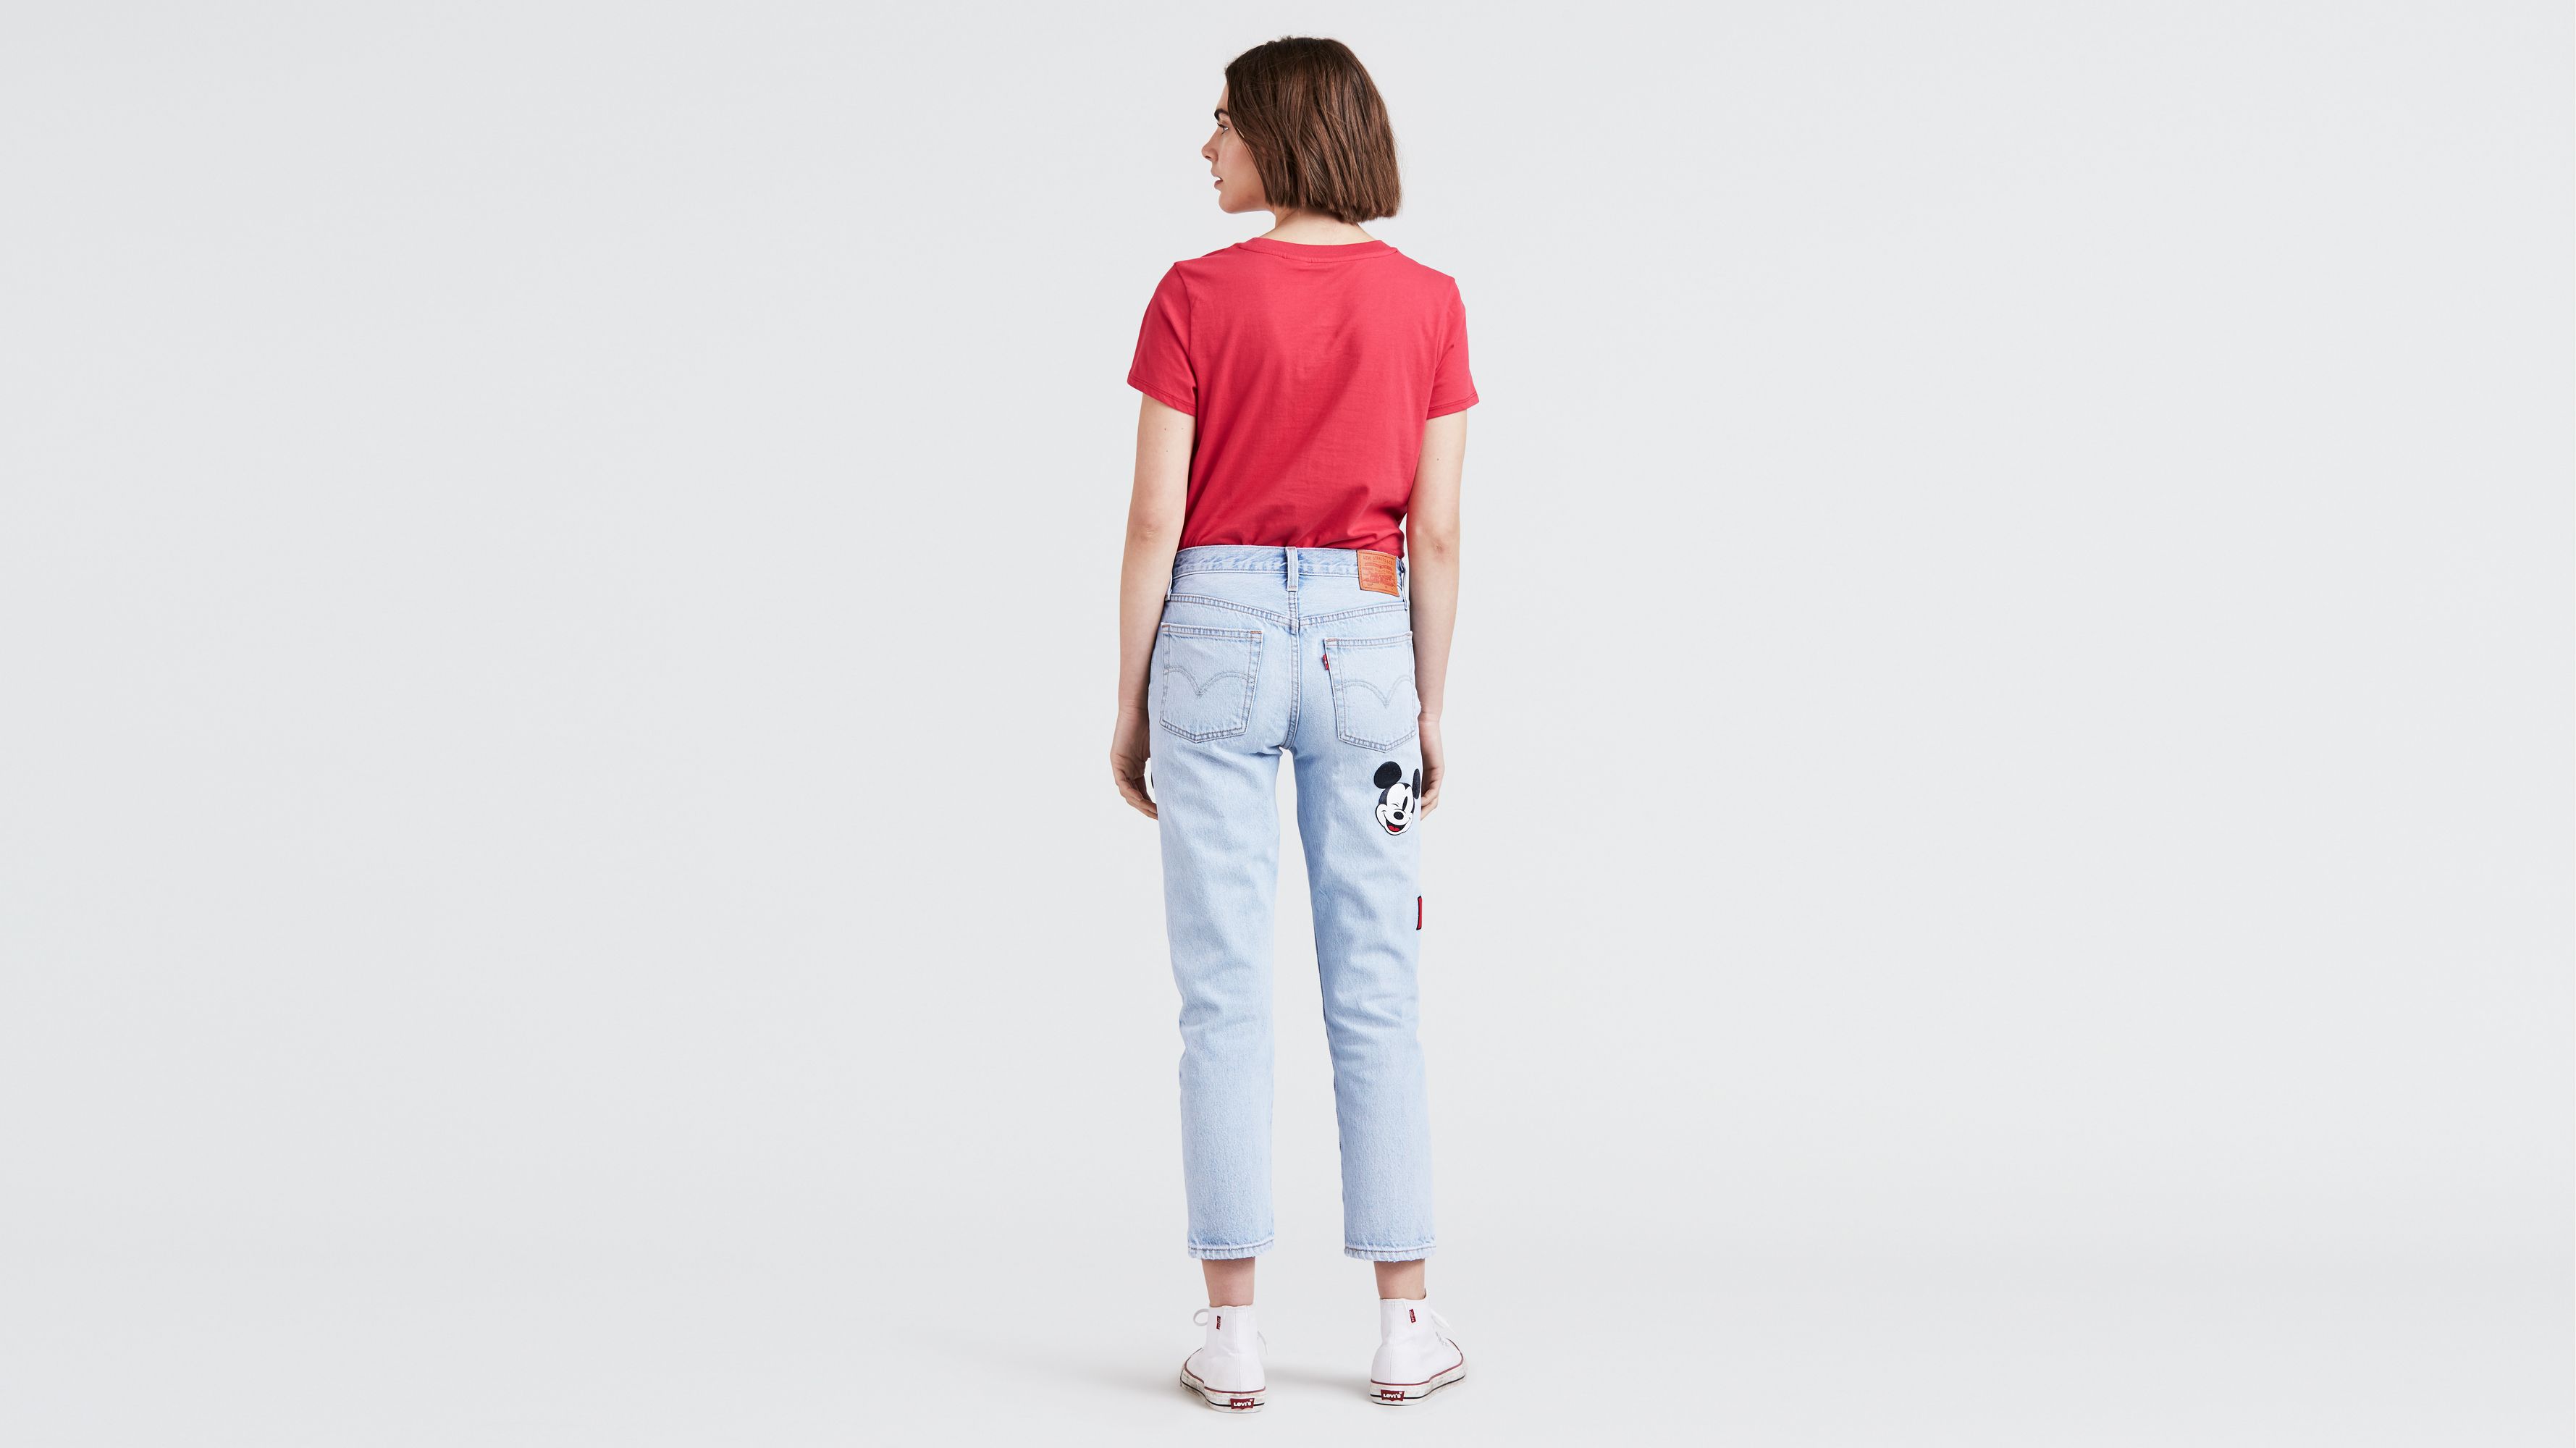 levi's mickey mouse jeans